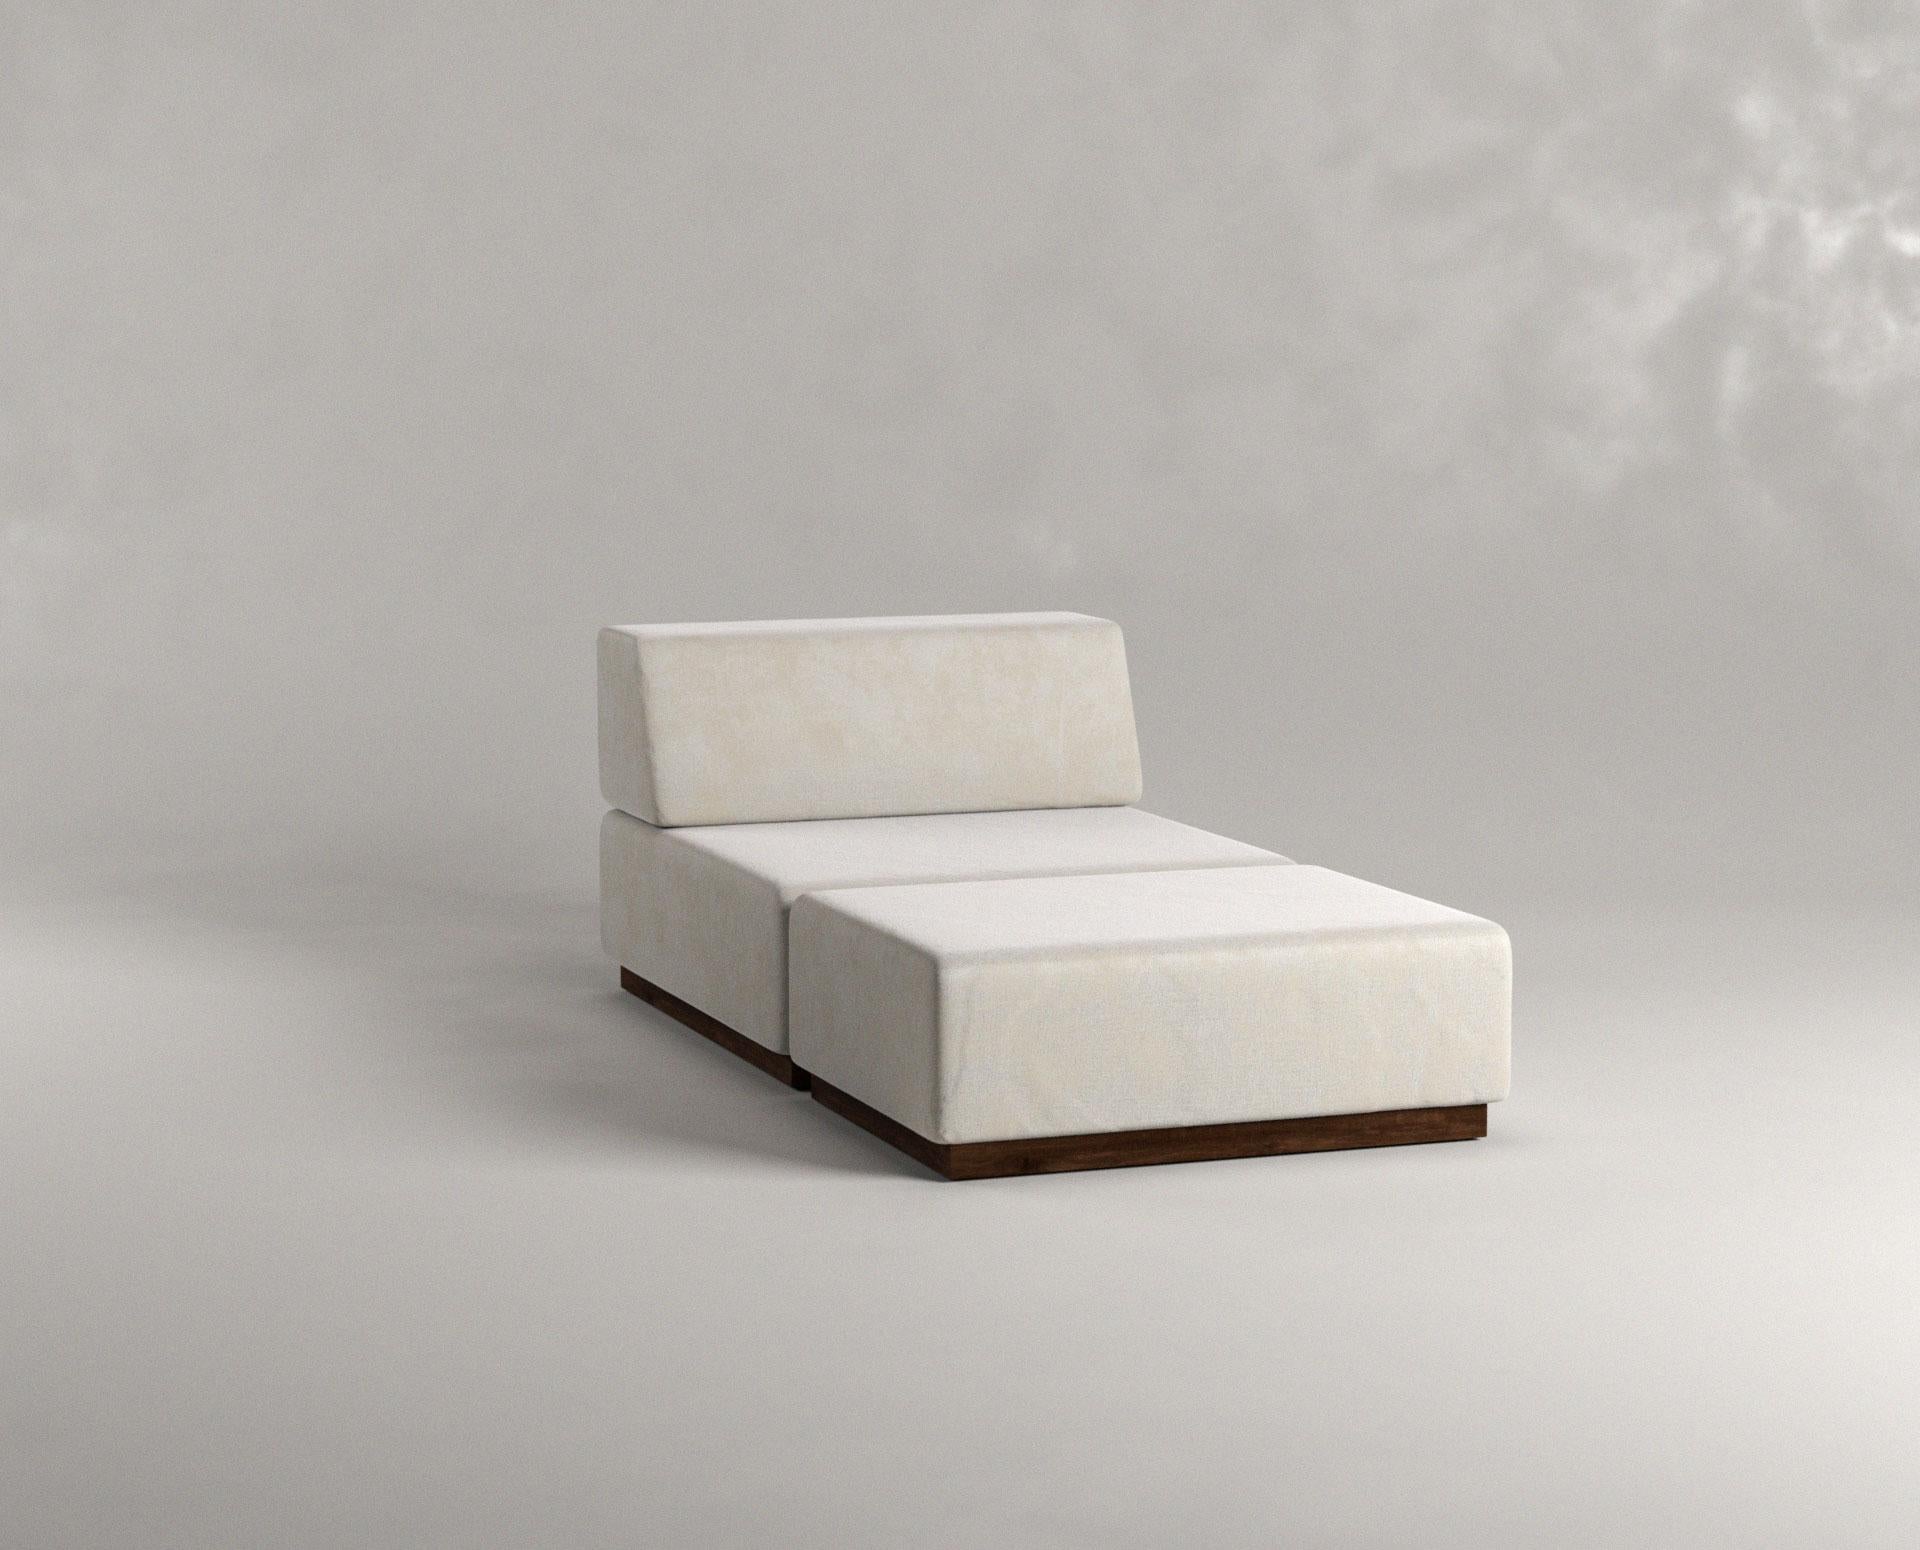 Nube lounger one seater white ottoman by Siete Studio
Dimensions: D80 x W160 x H60 cm.
Materials: Walnut, cushions, upholstery. 

Characterised by its round edges and soft white cushions, Nube carries the comforting sensation of falling into a